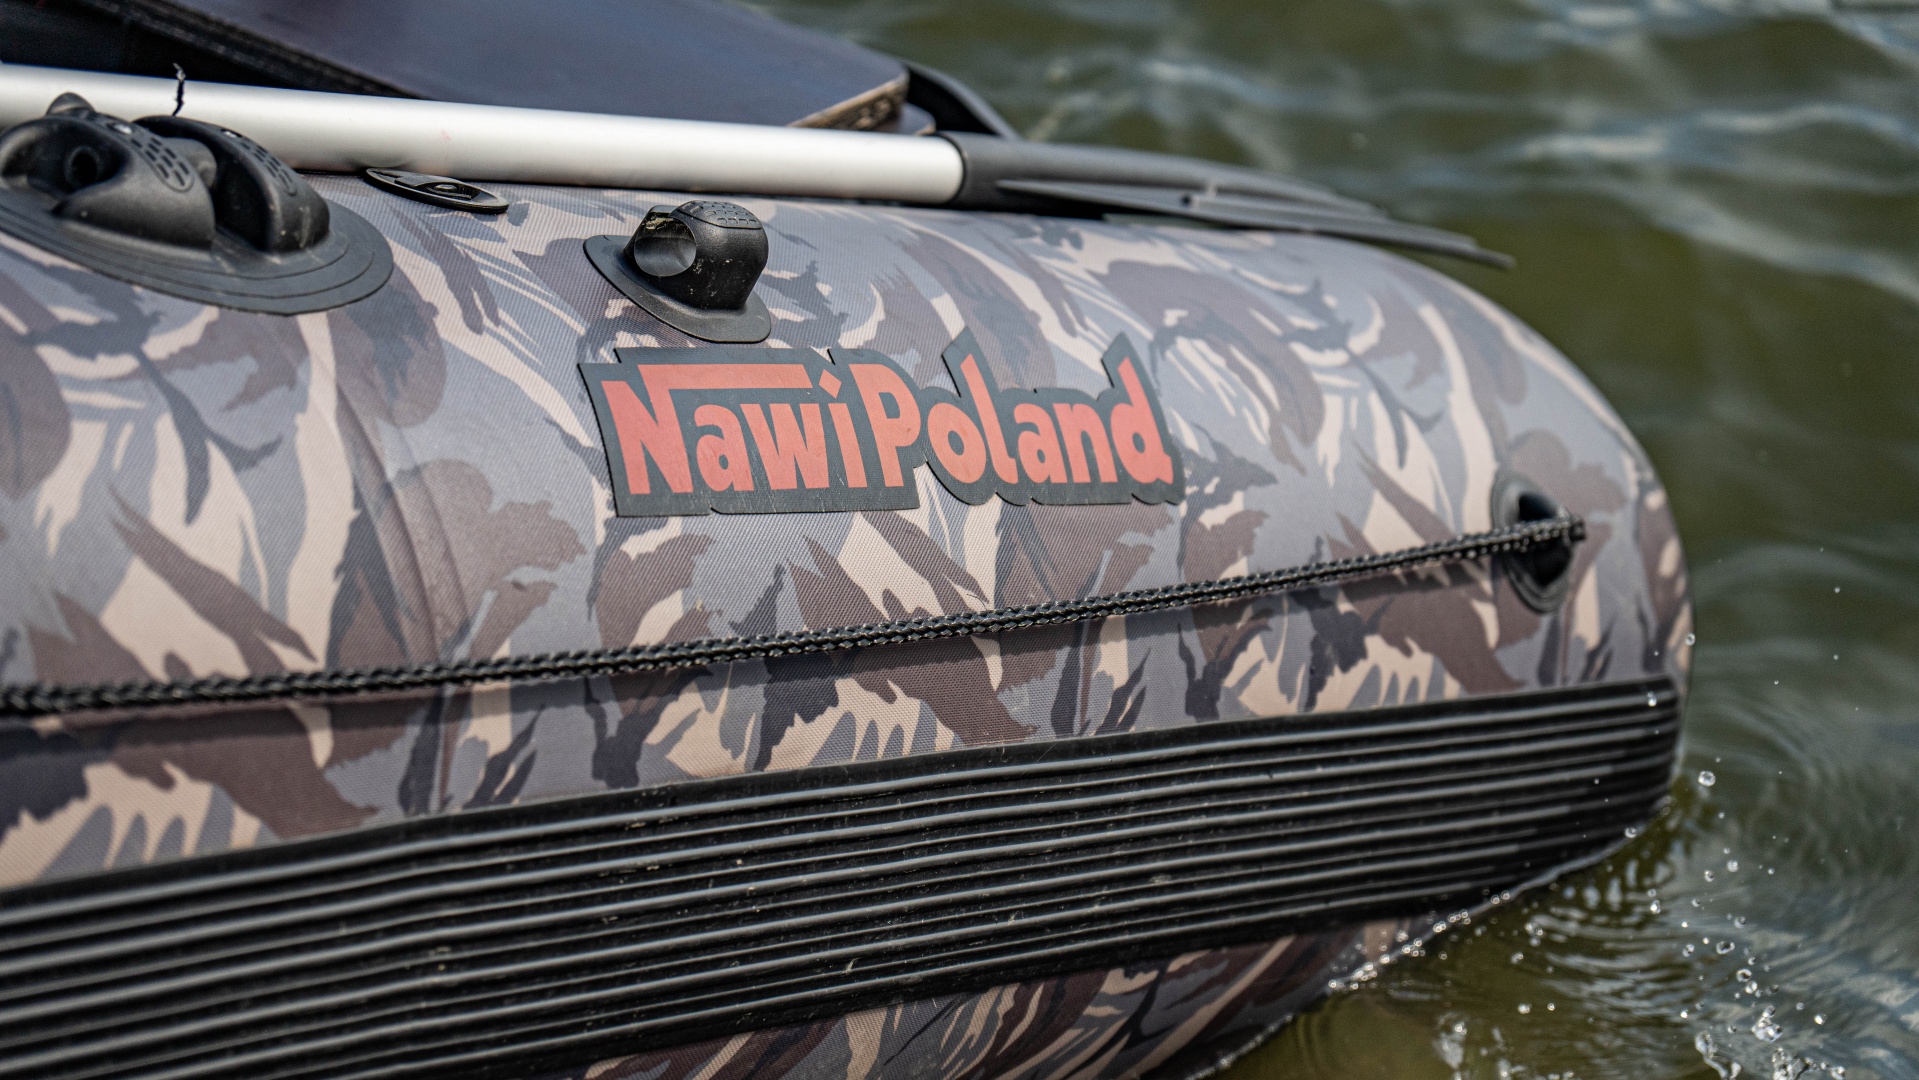 NawiPoland CAT 330 Inflatable Boat - Катамаран